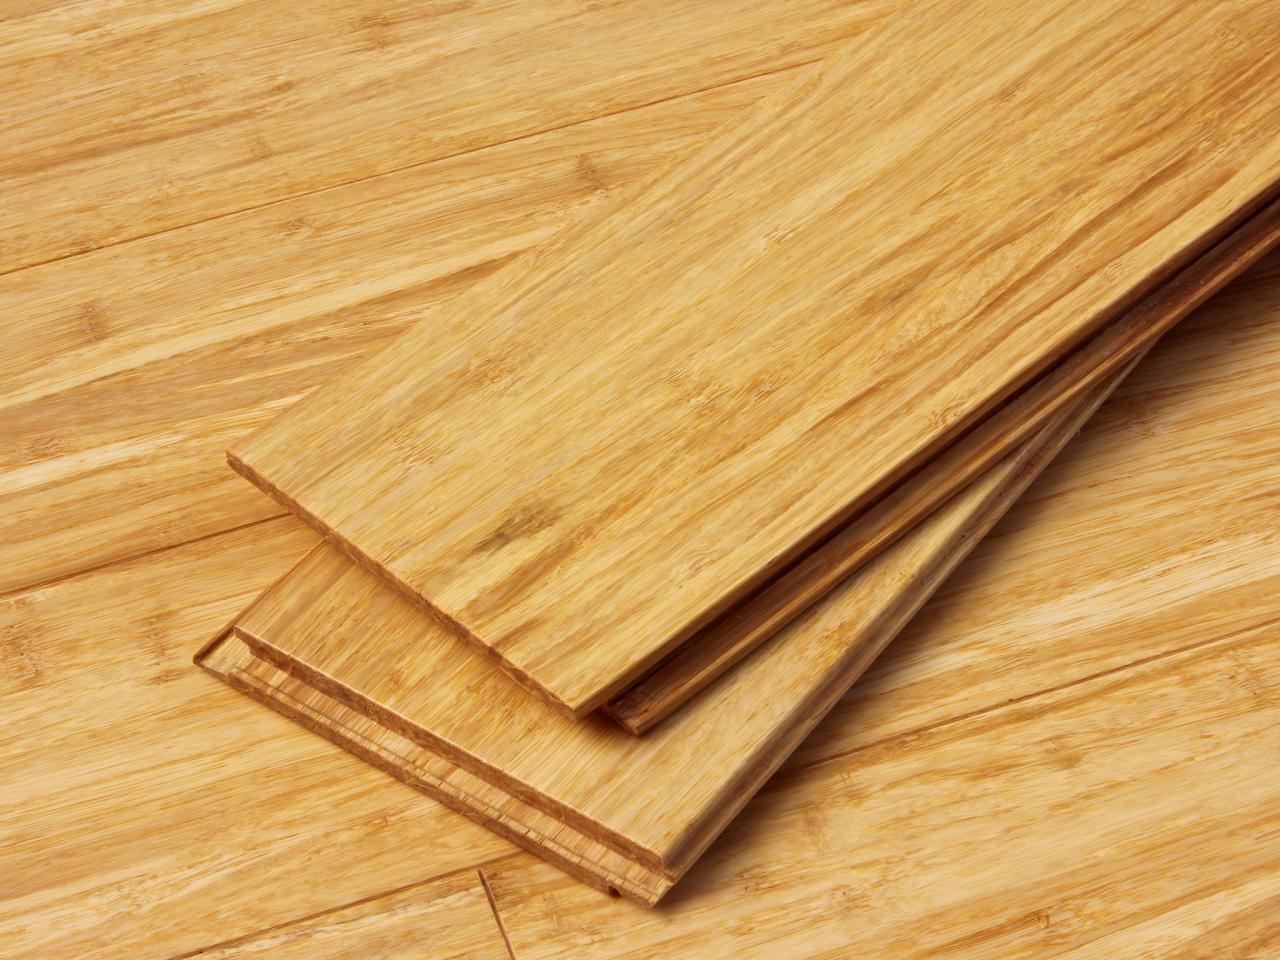 How To Install Two Tone Bamboo Flooring, Does Bamboo Flooring Need Underlayment